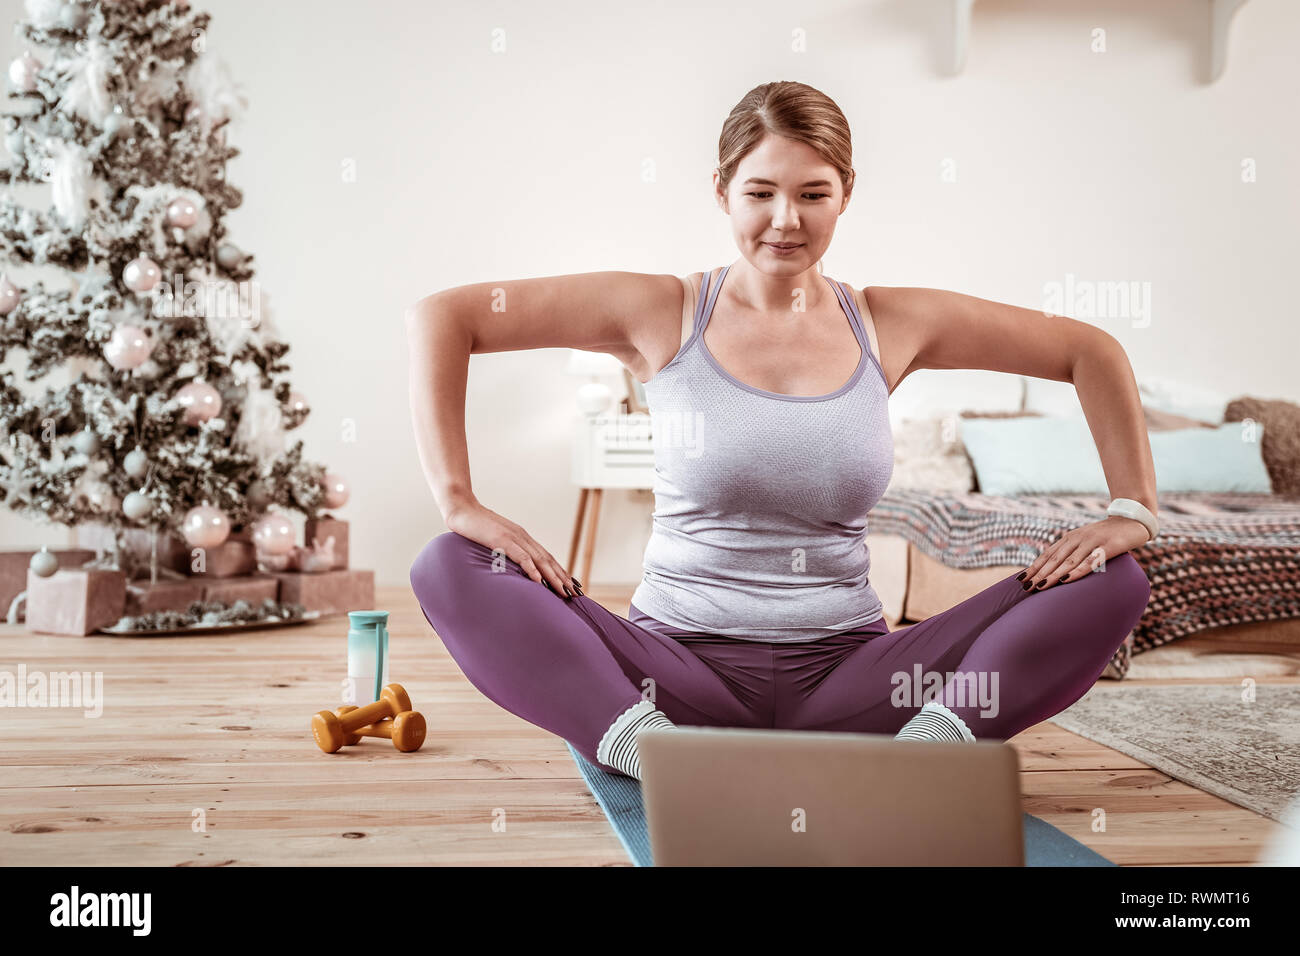 Resolute appealing woman recreating yoga posture from video lesson Stock Photo